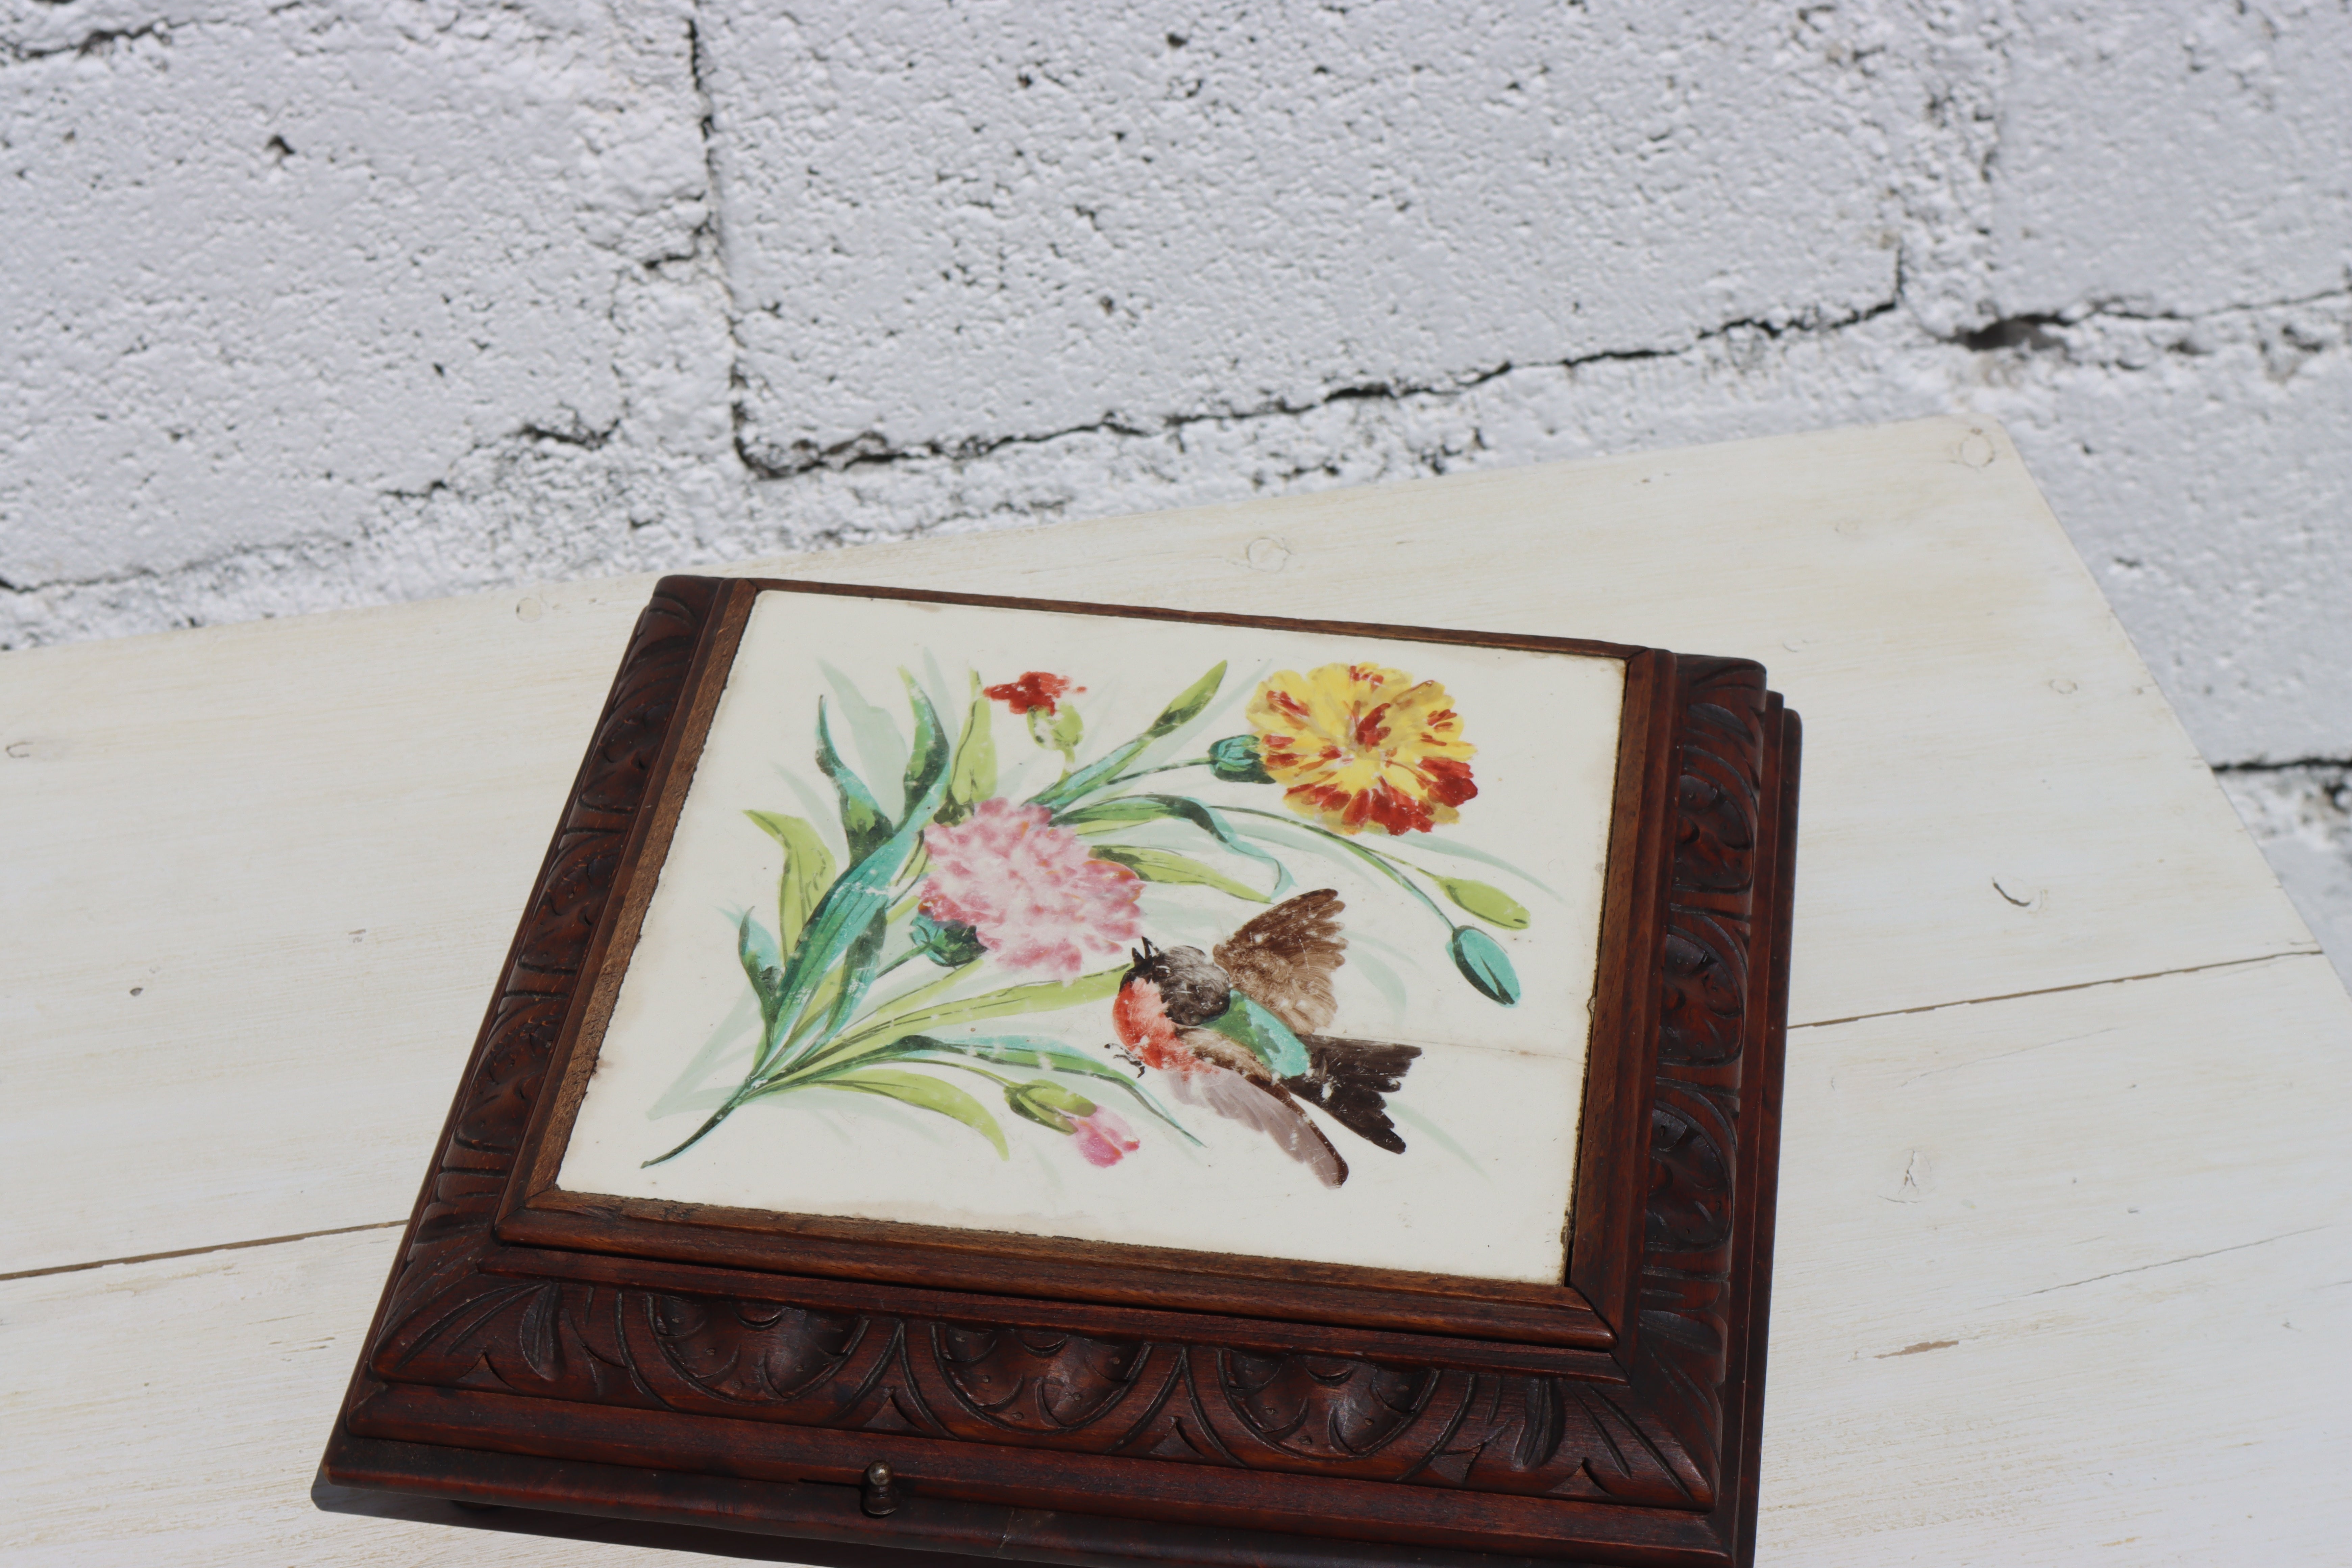 Wonderful vintage Table Decoration - hand-carved Walnut Music Box Trivet with Art Nouveau Motifs.
Colorful hand-painted Ceramic Art Pottery  Surface with Flower and Bird motif.

According to the label on the back, this box plays the Waltz